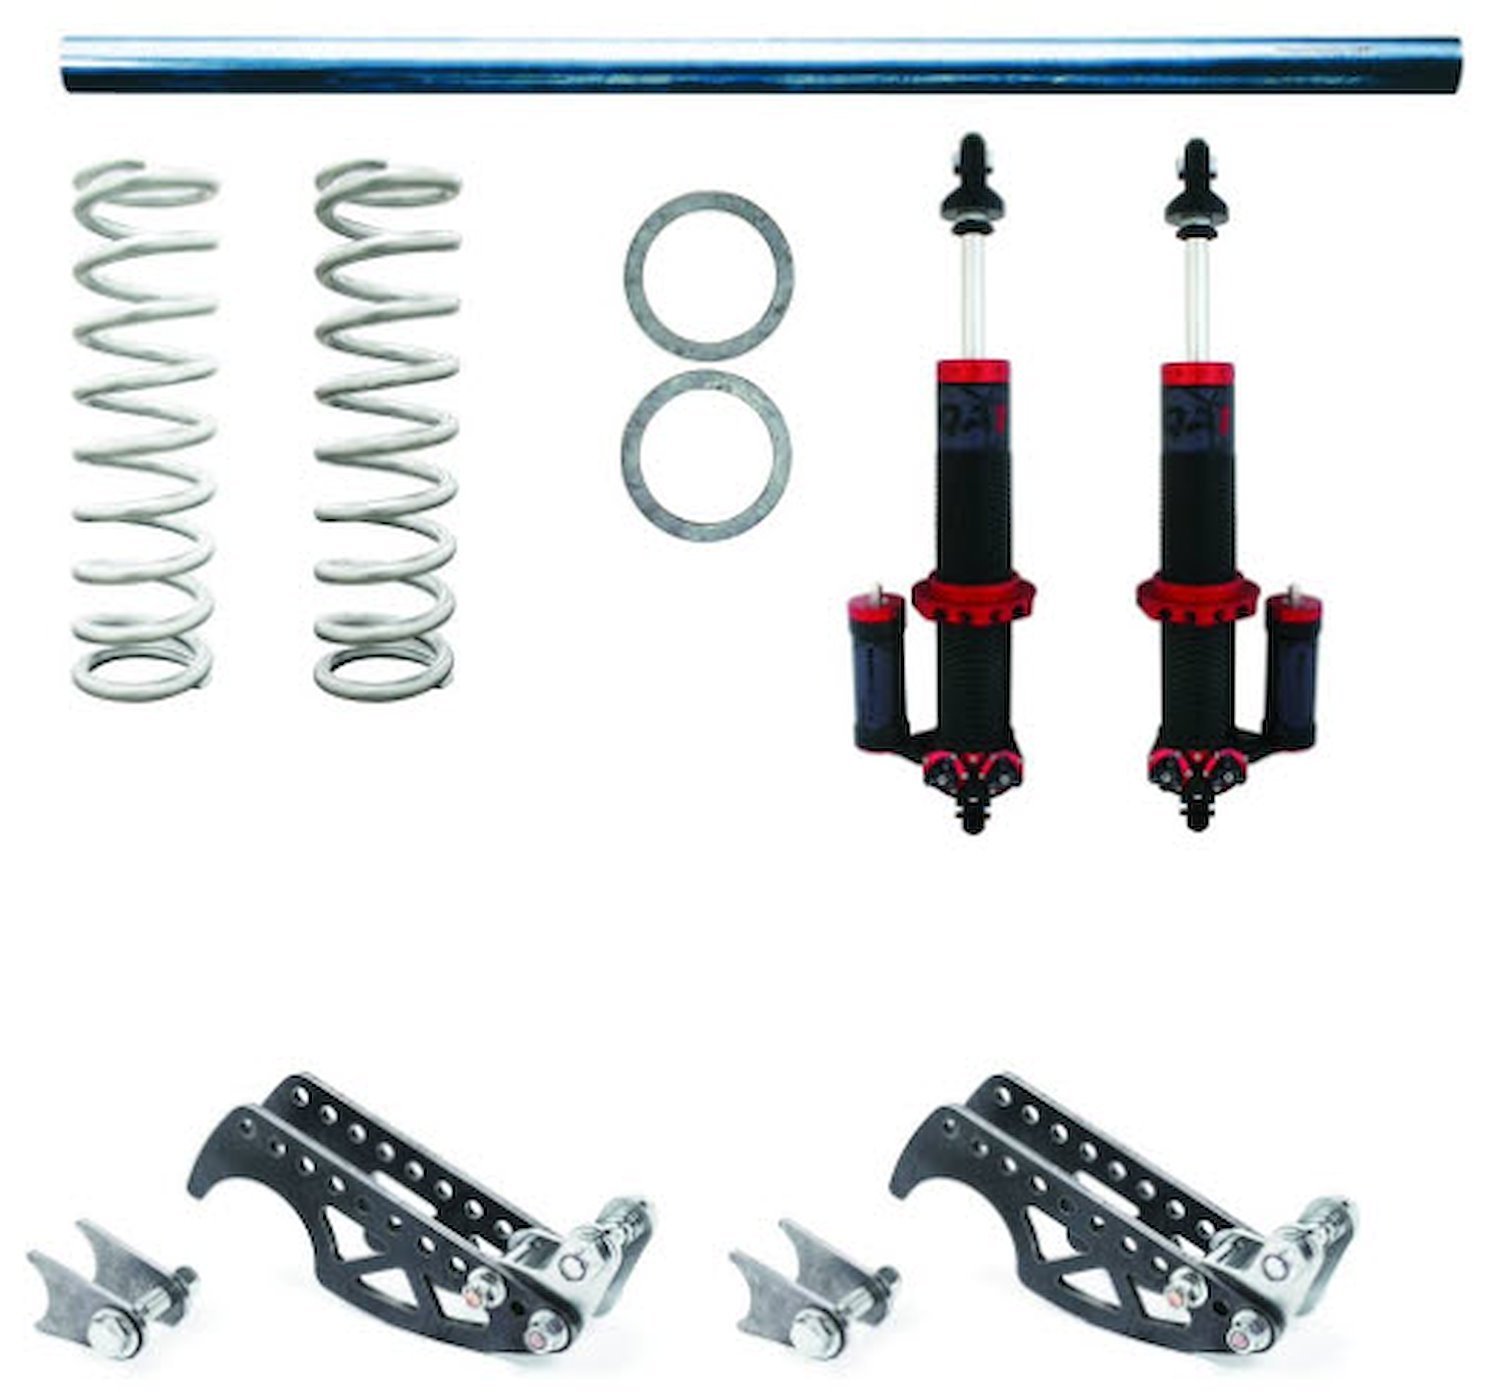 DM501-3001 Heavy-Duty Pro Rear Coil-Over Conversion System for 3 1/4 in. Axle Tubes w/MOD-Series Shocks & 300 lb. Springs